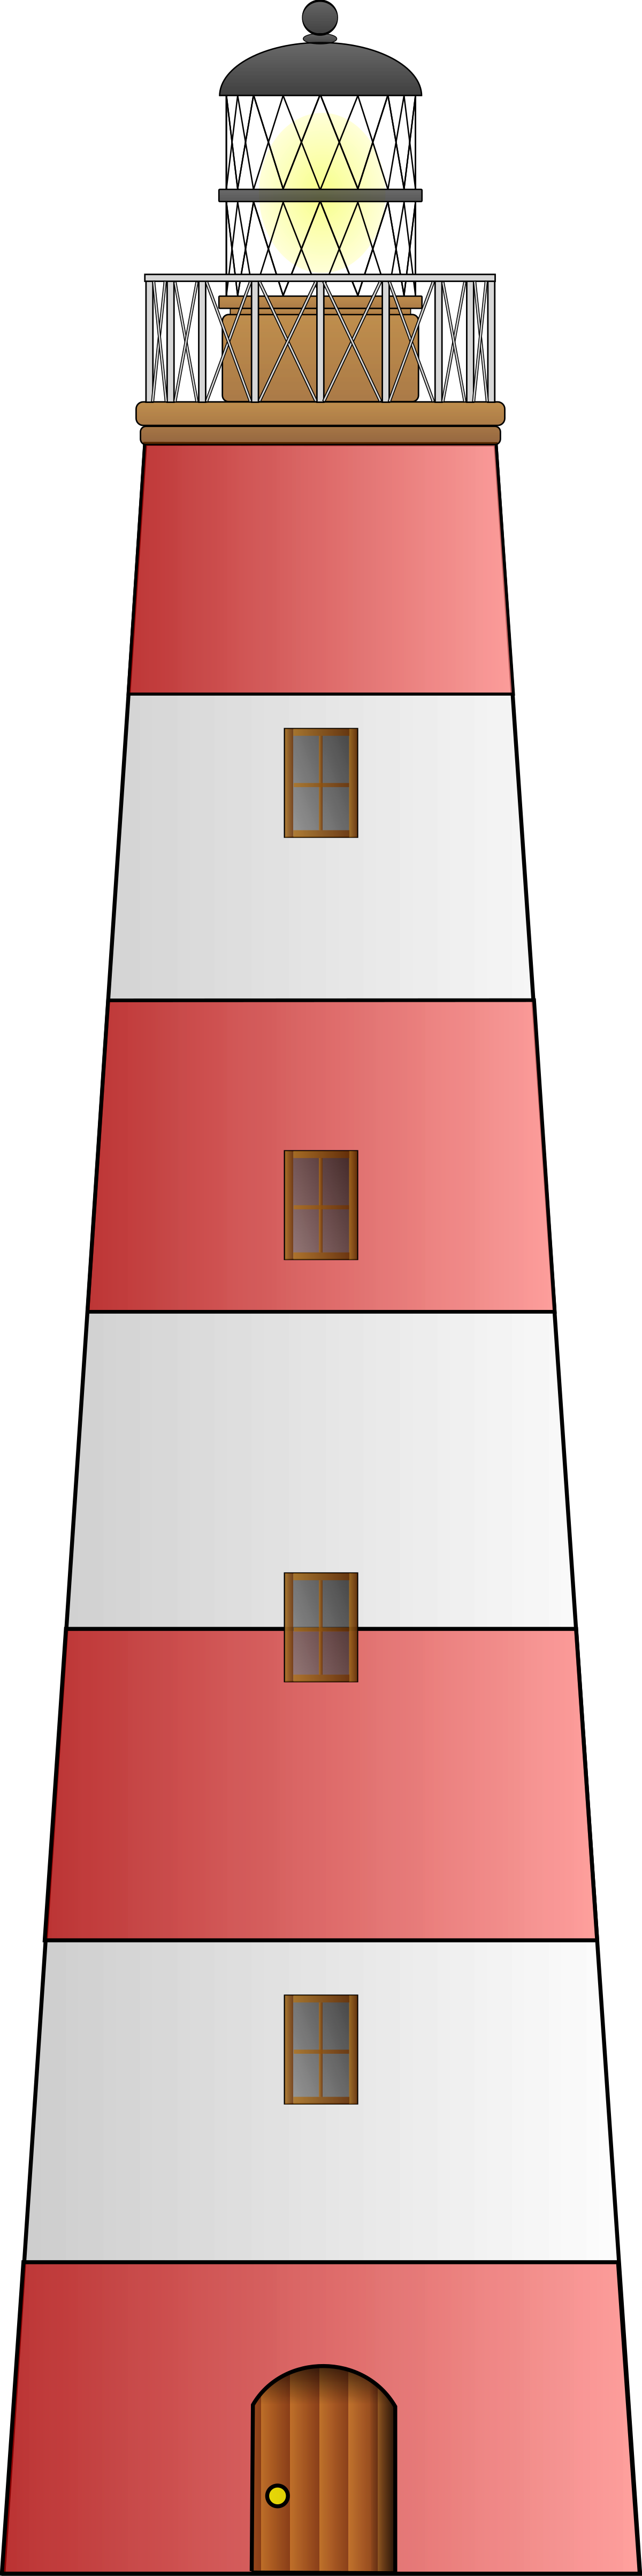 Download File:Lighthouse.svg - Wikipedia